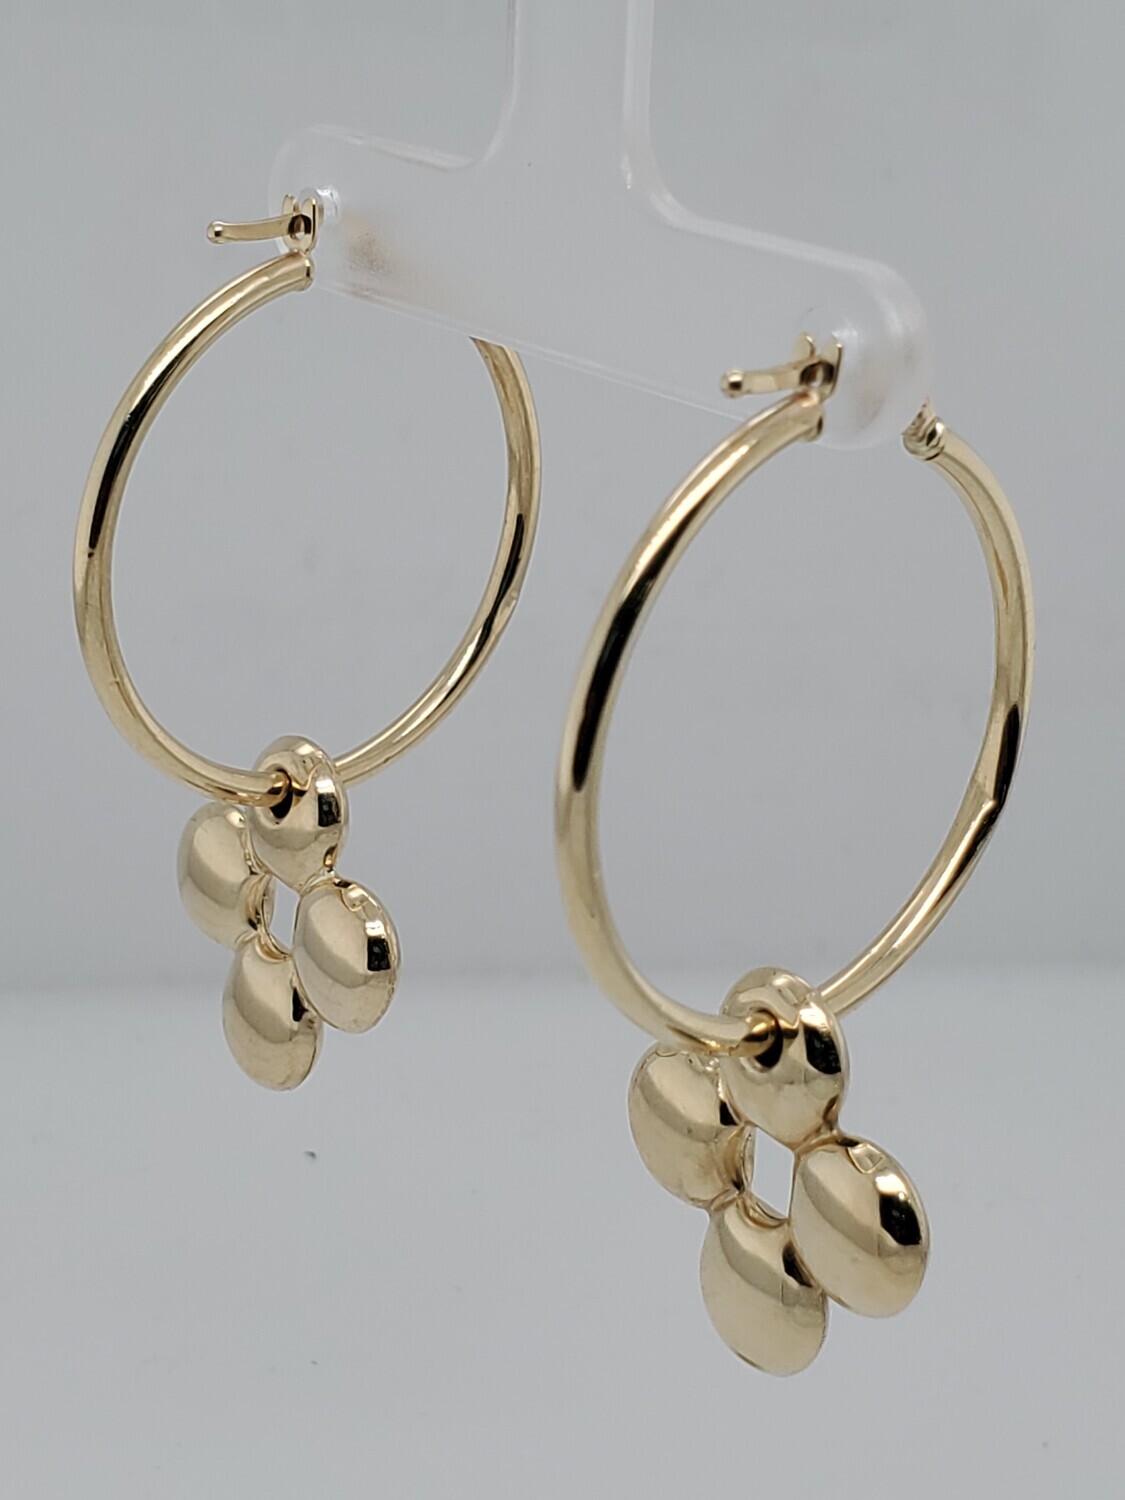 BRAND NEW!! 10k HOLLOW TUBE HOOPS WITH DANGLE FLOWER EARRING SET INVENTORY # I-18117 75TH AVE